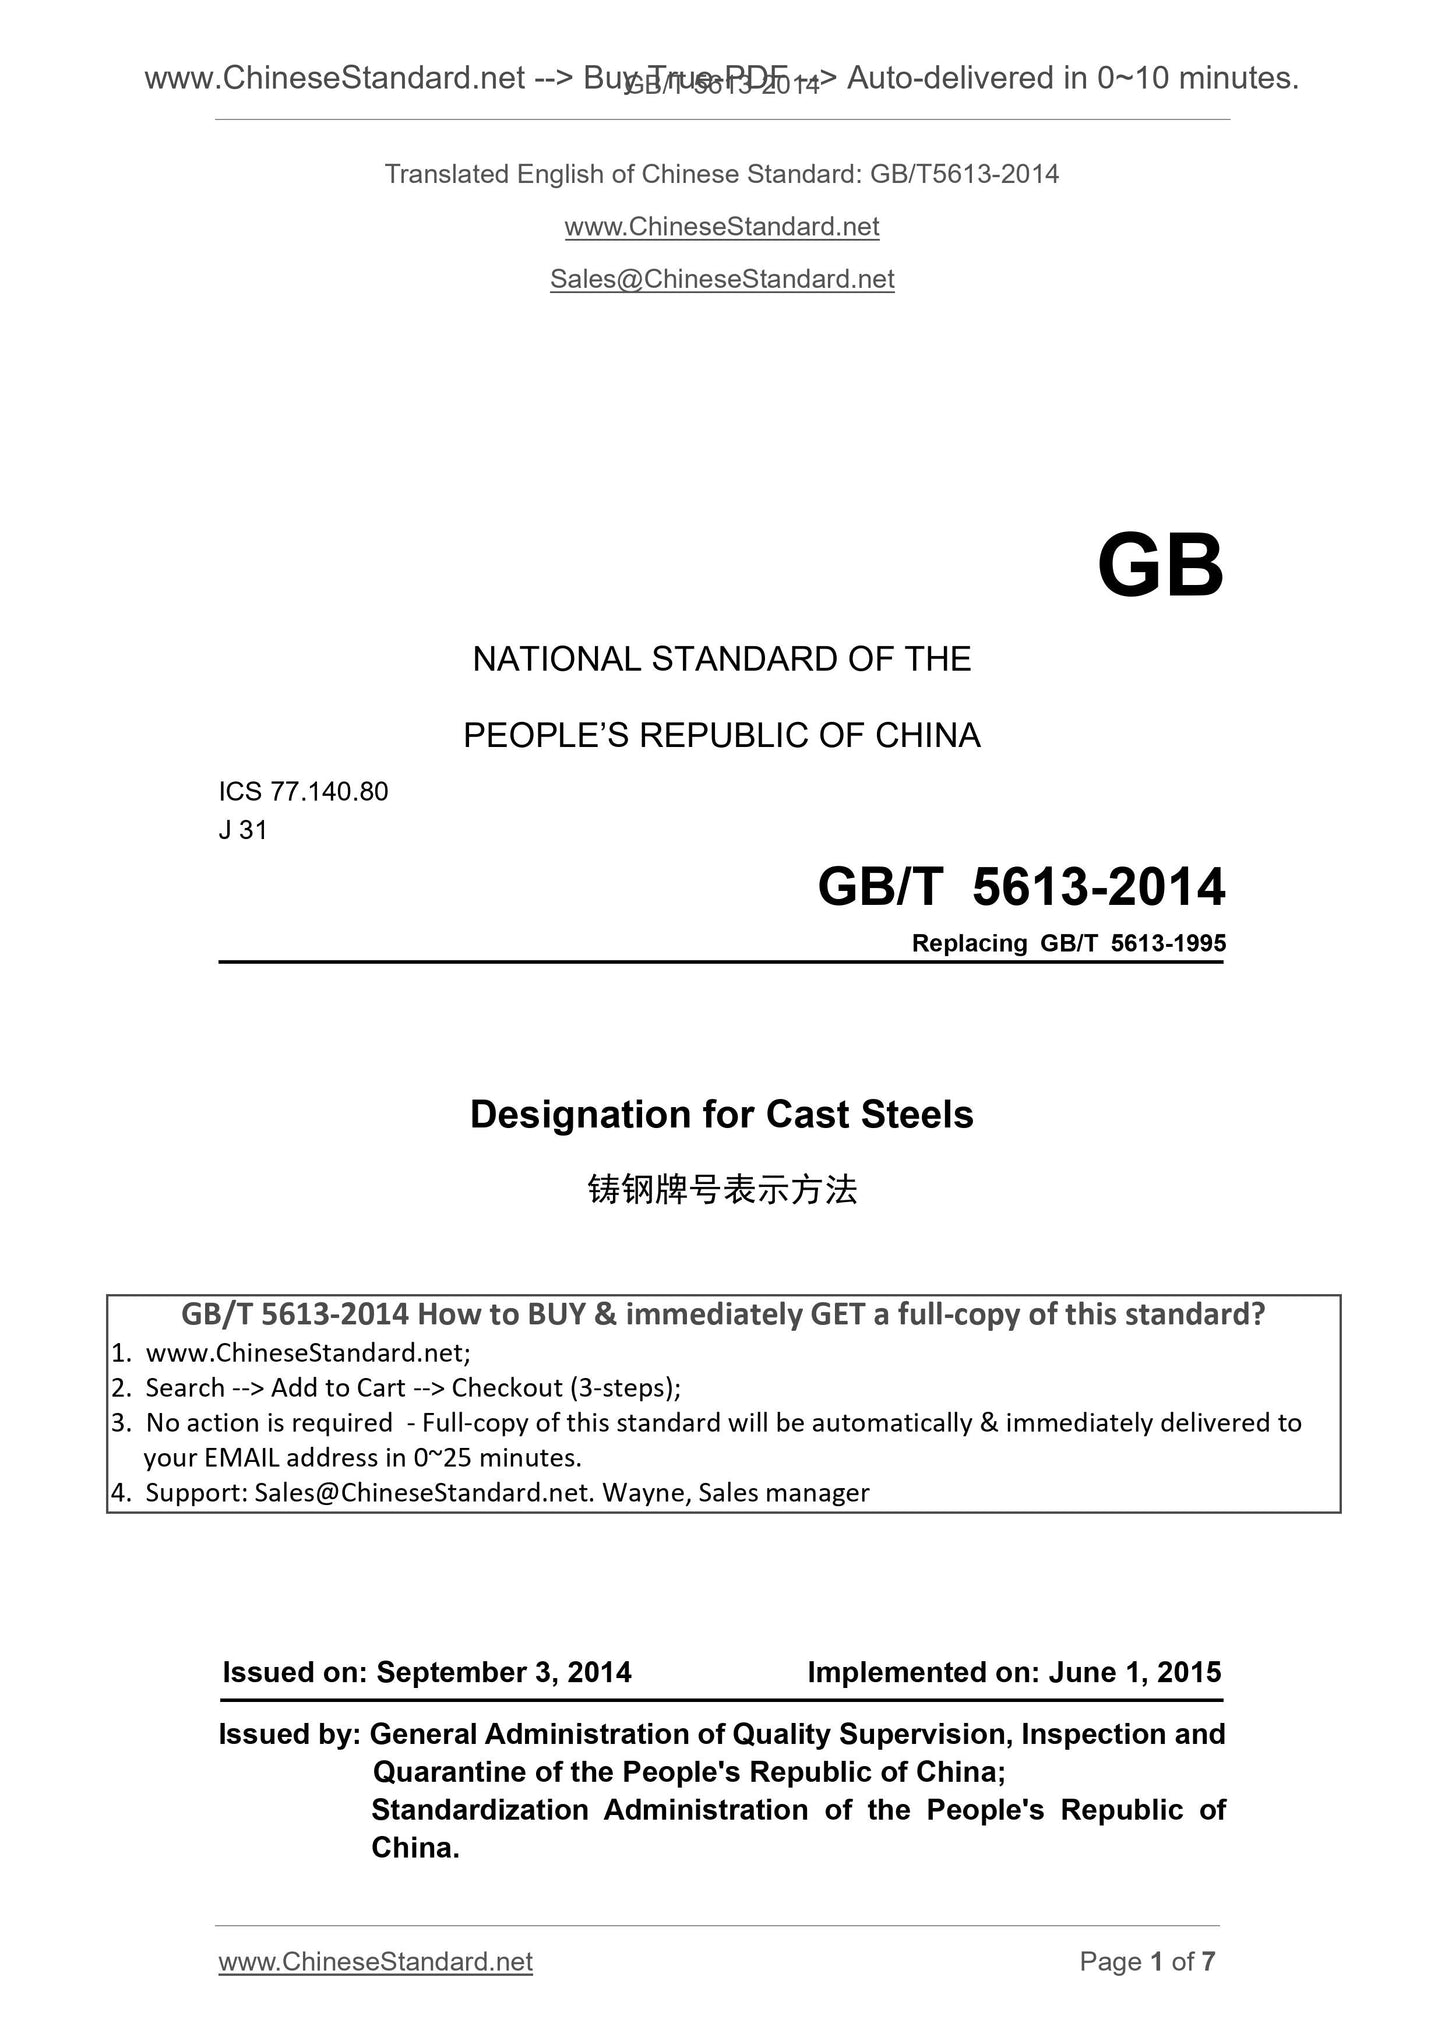 GB/T 5613-2014 Page 1